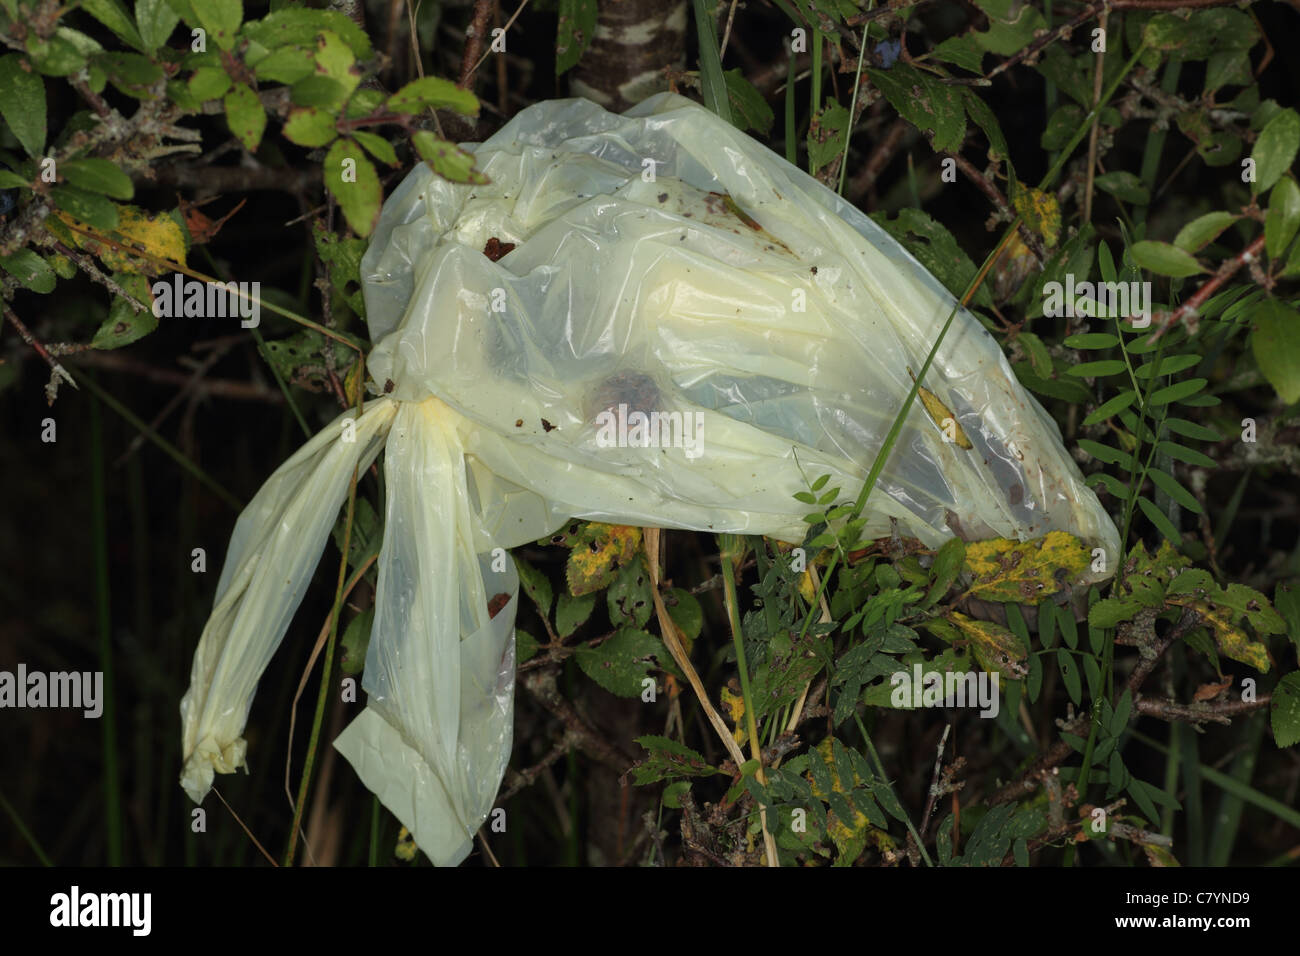 Dog waste bag hanging in bush, Purbeck Dorset. Stock Photo